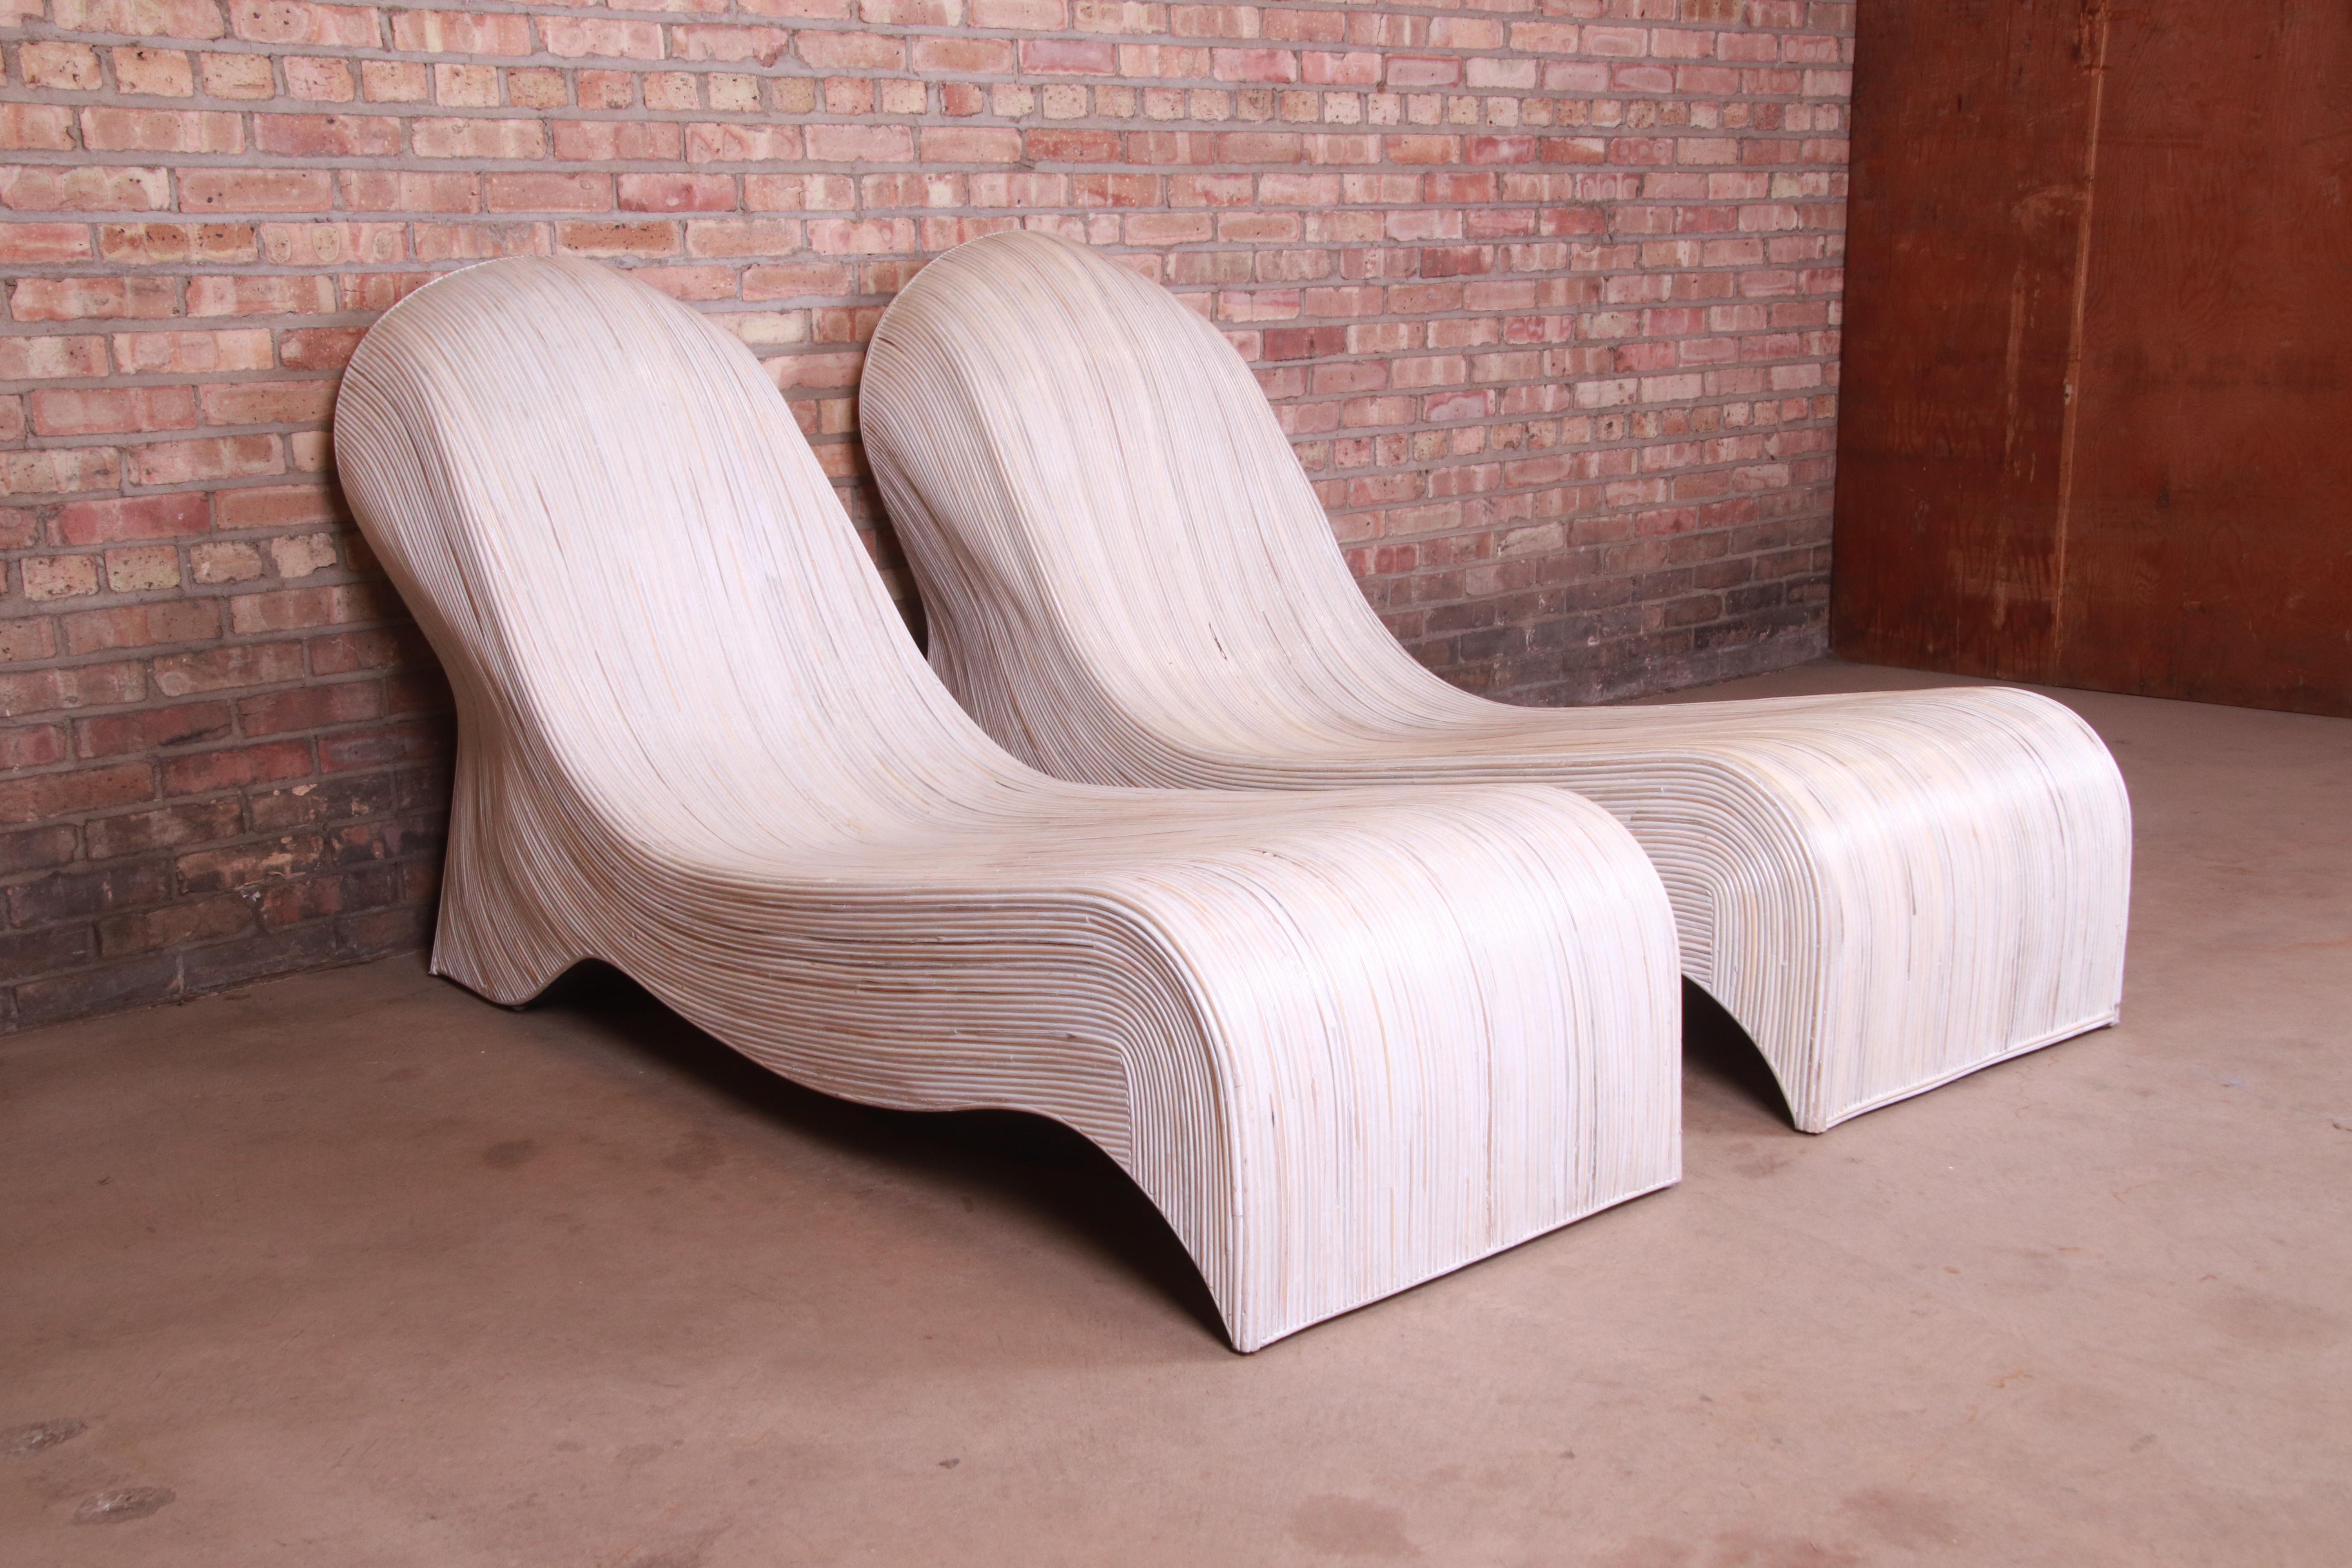 Betty Cobonpue Sculptural Split Reed Rattan Chaise Lounges, Pair In Good Condition For Sale In South Bend, IN